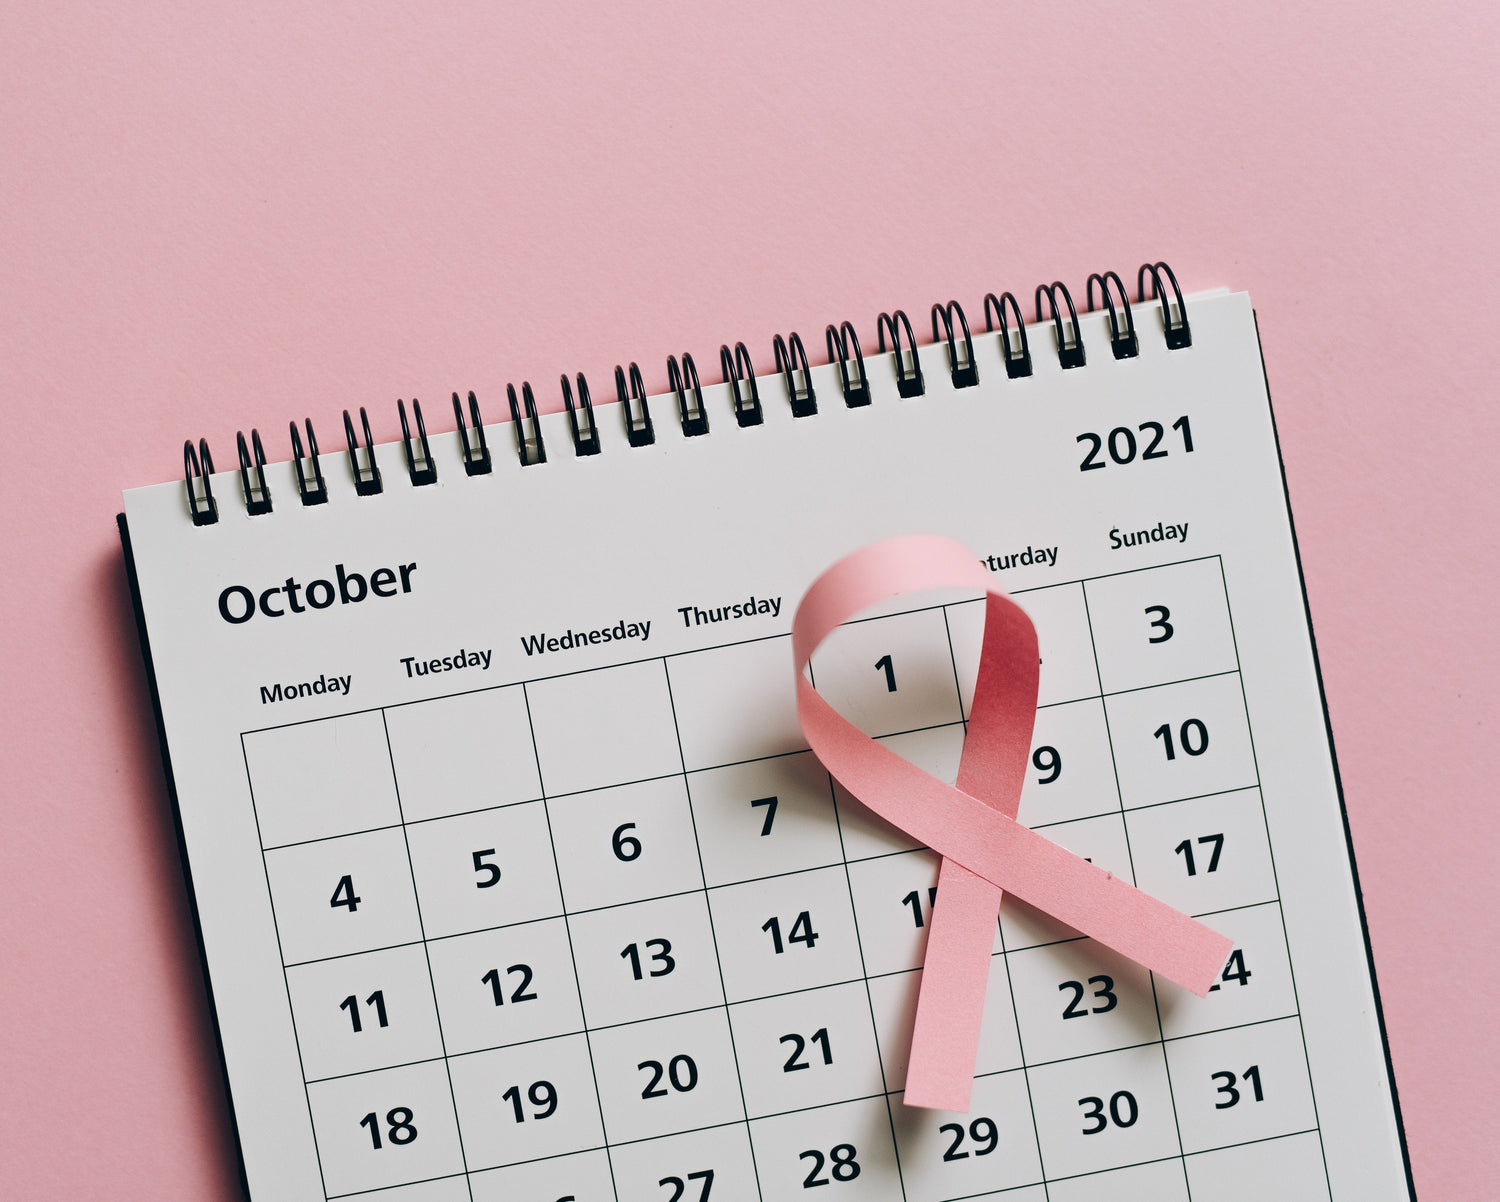 October is Breast Cancer Awareness Month - SAVE ME FROM